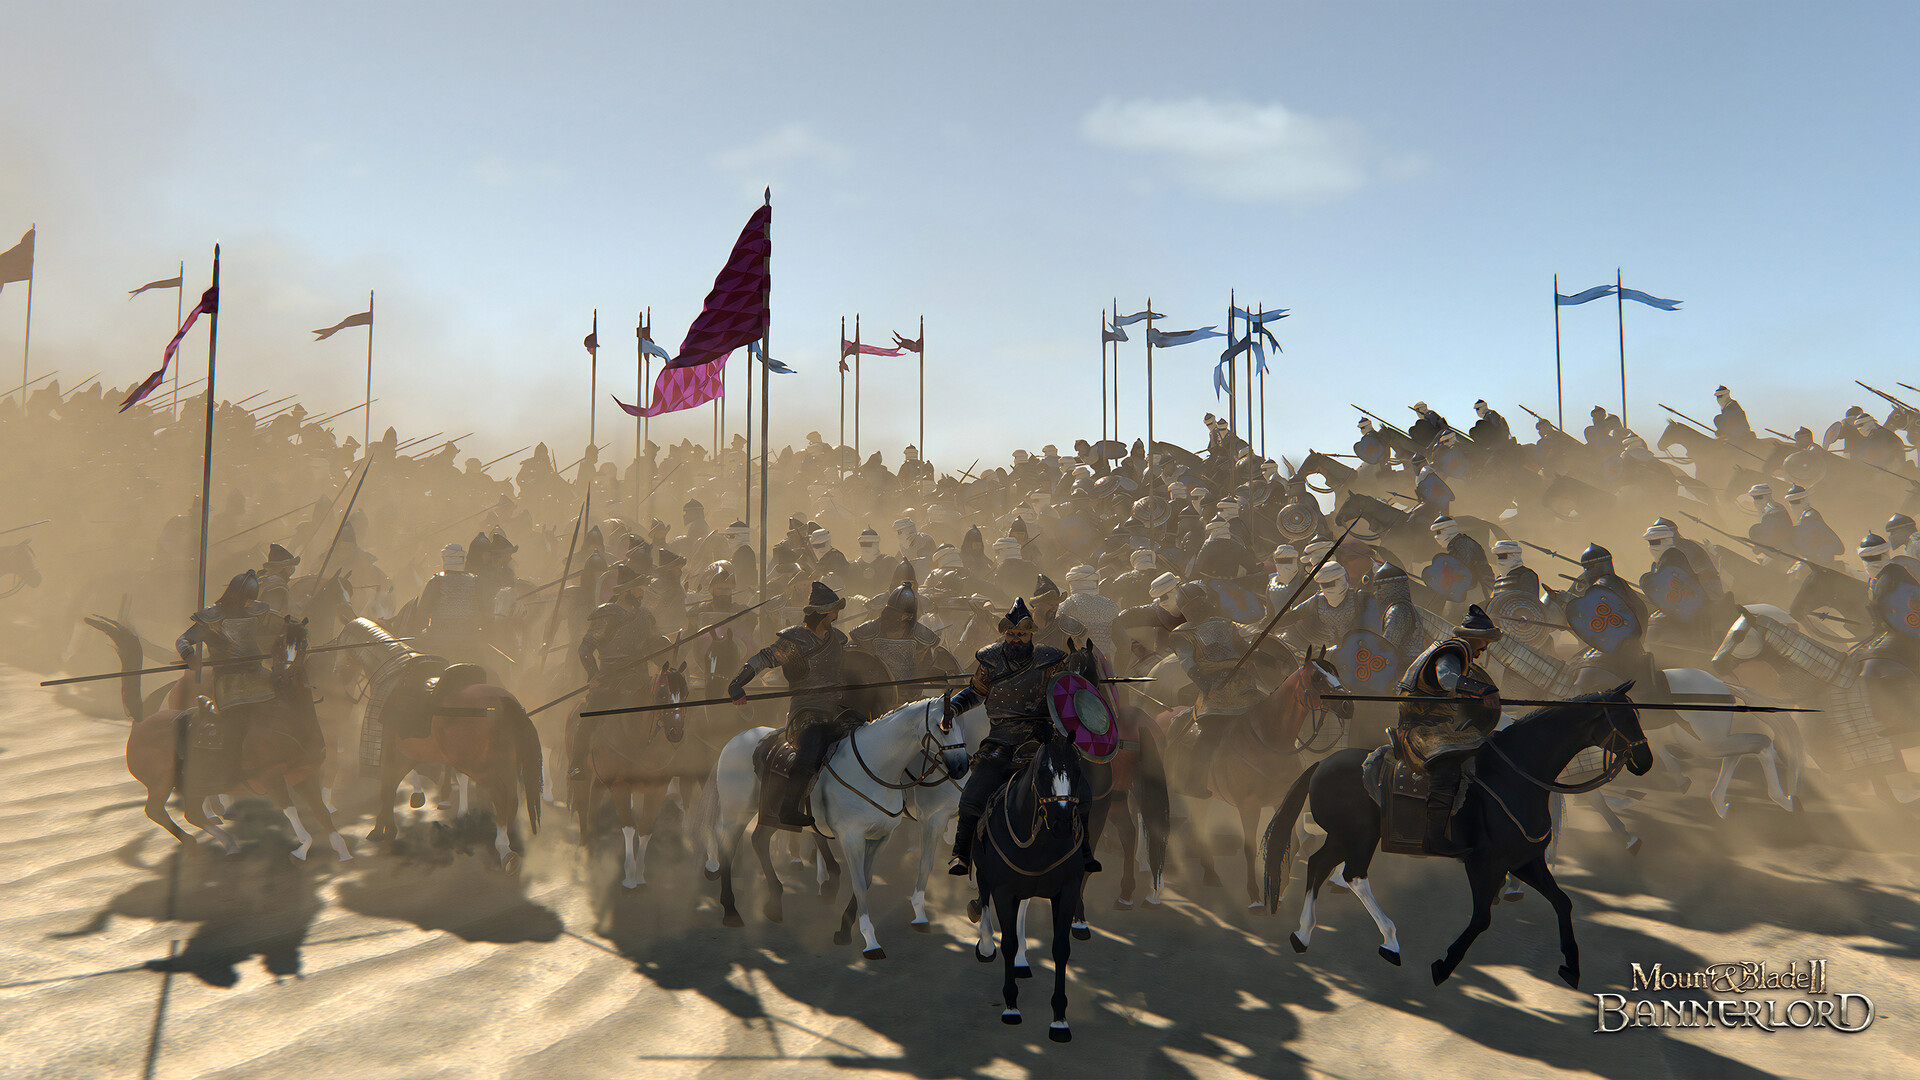 Baixar Mount and Blade 2 Bannerlord para pc via torrent